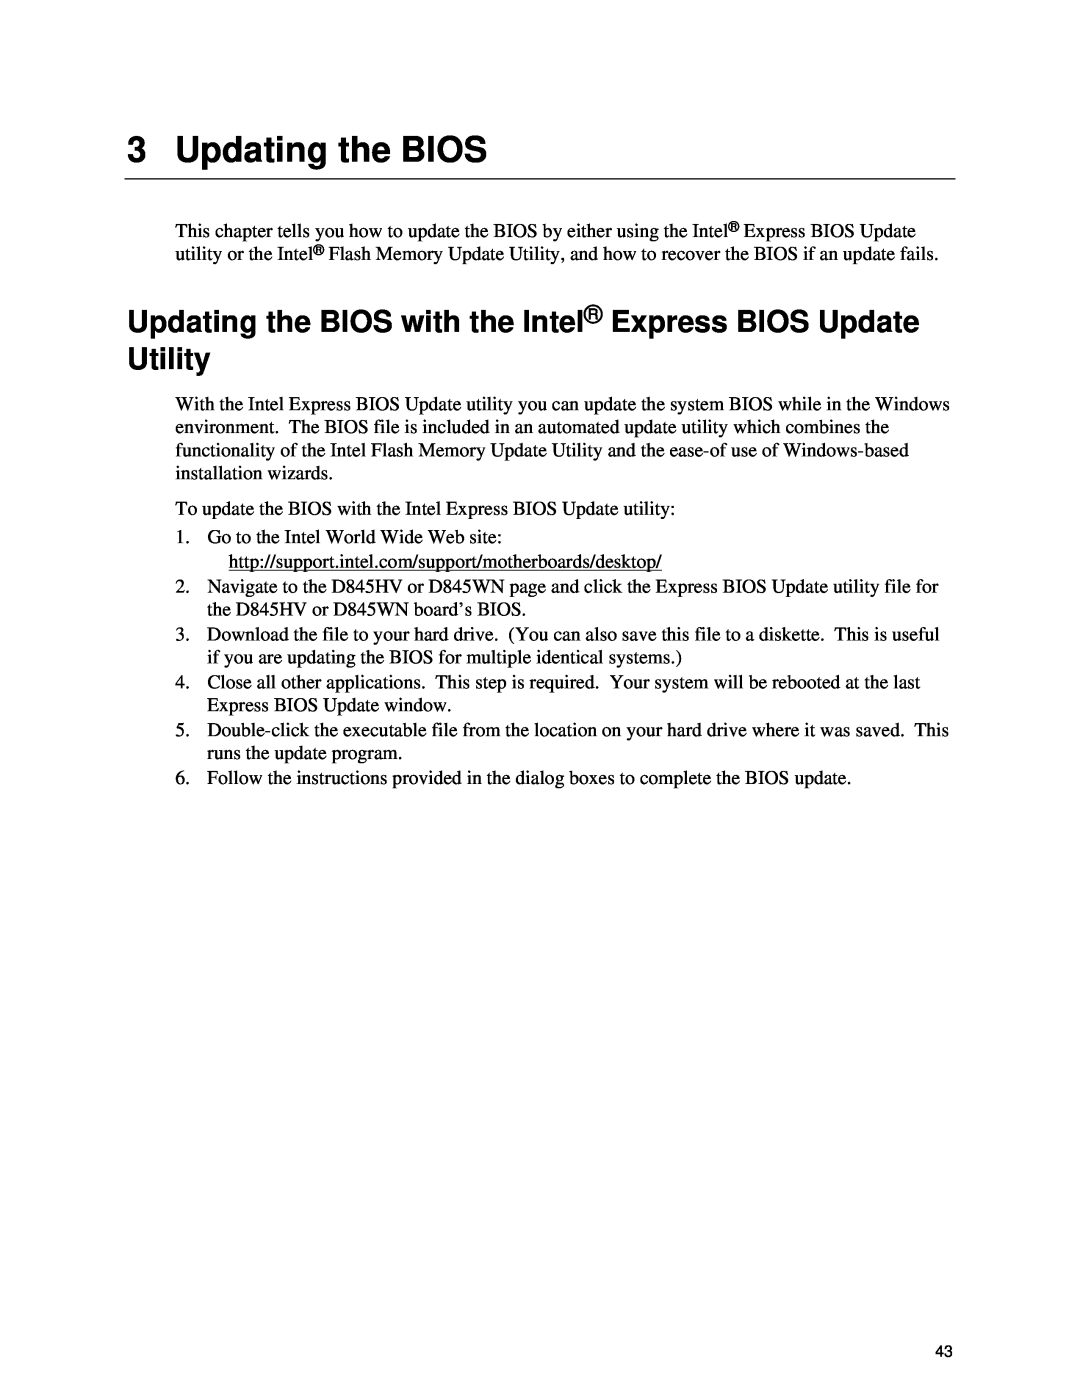 Intel D845HV, D845WN manual Updating the BIOS with the Intel Express BIOS Update Utility 